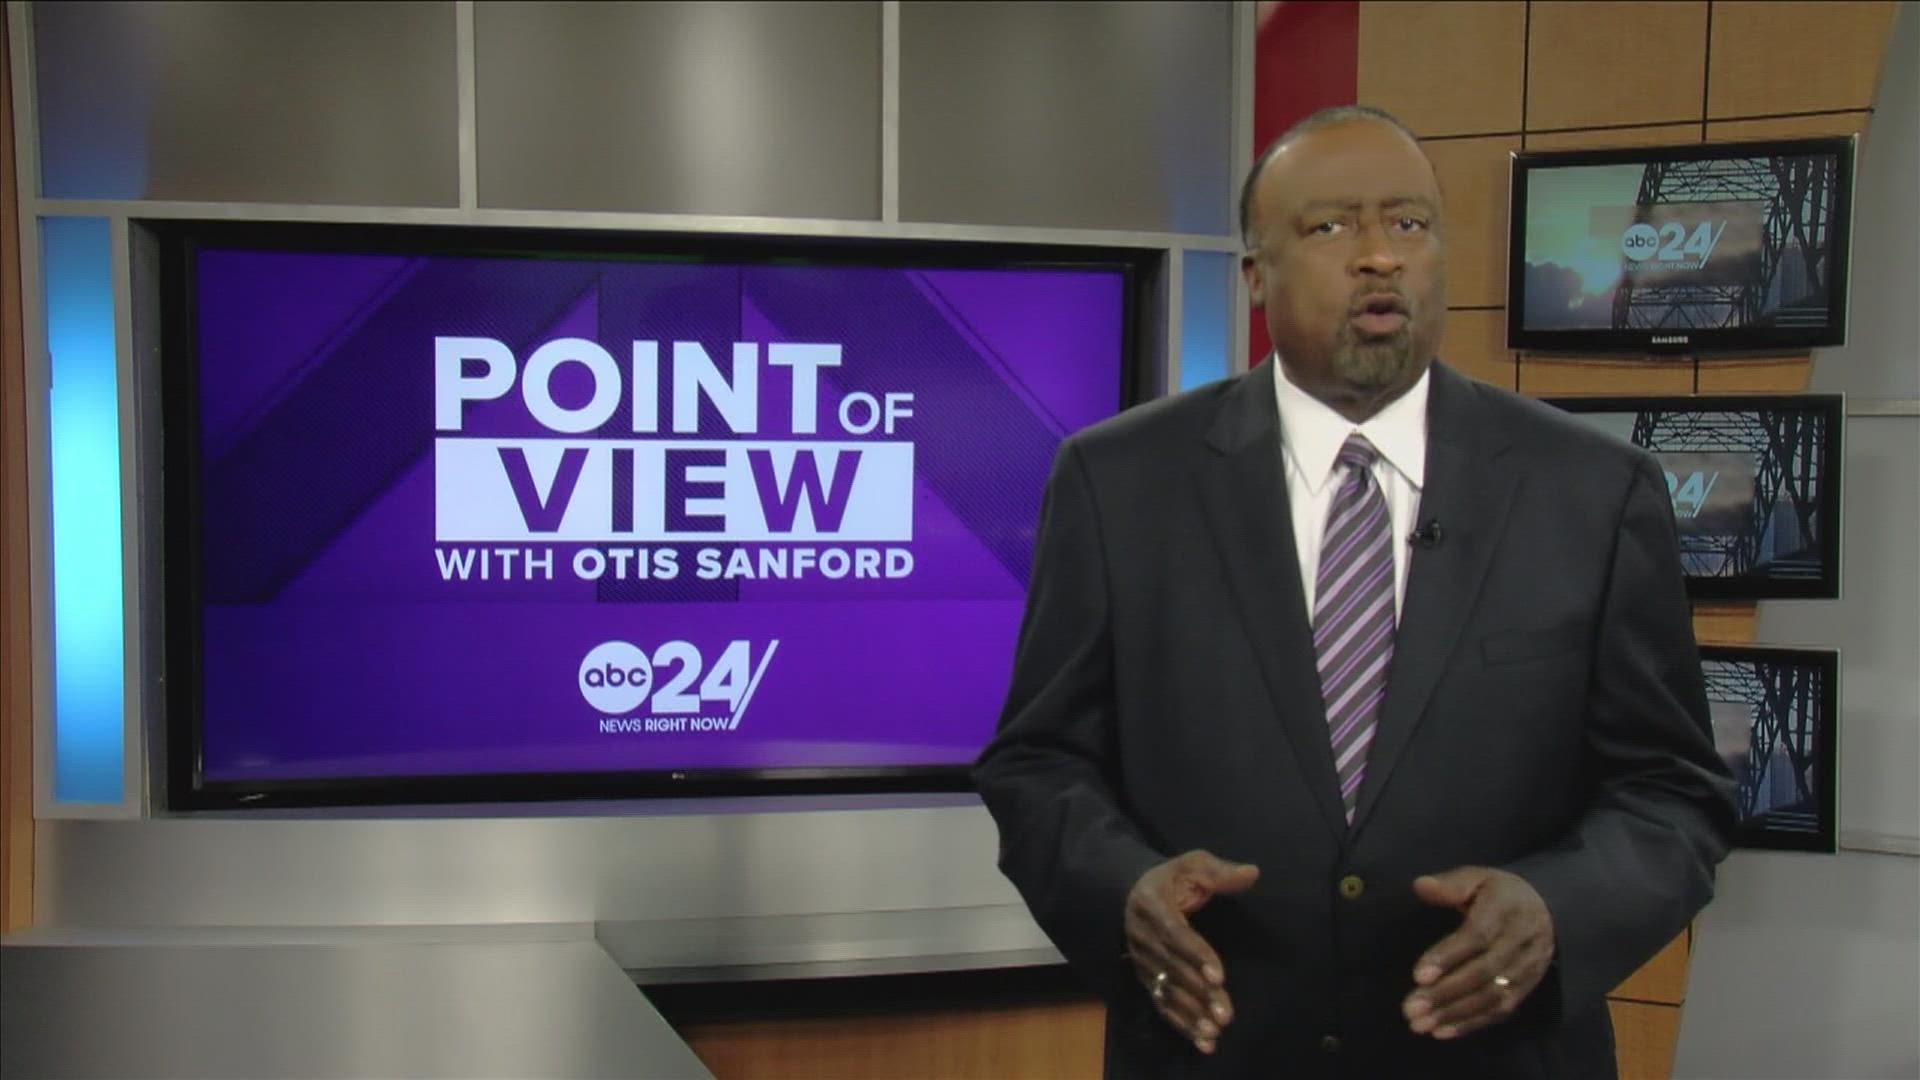 ABC24 political analyst and commentator Otis Sanford shared his point of view on the upcoming races for Shelby County D.A. and mayor.